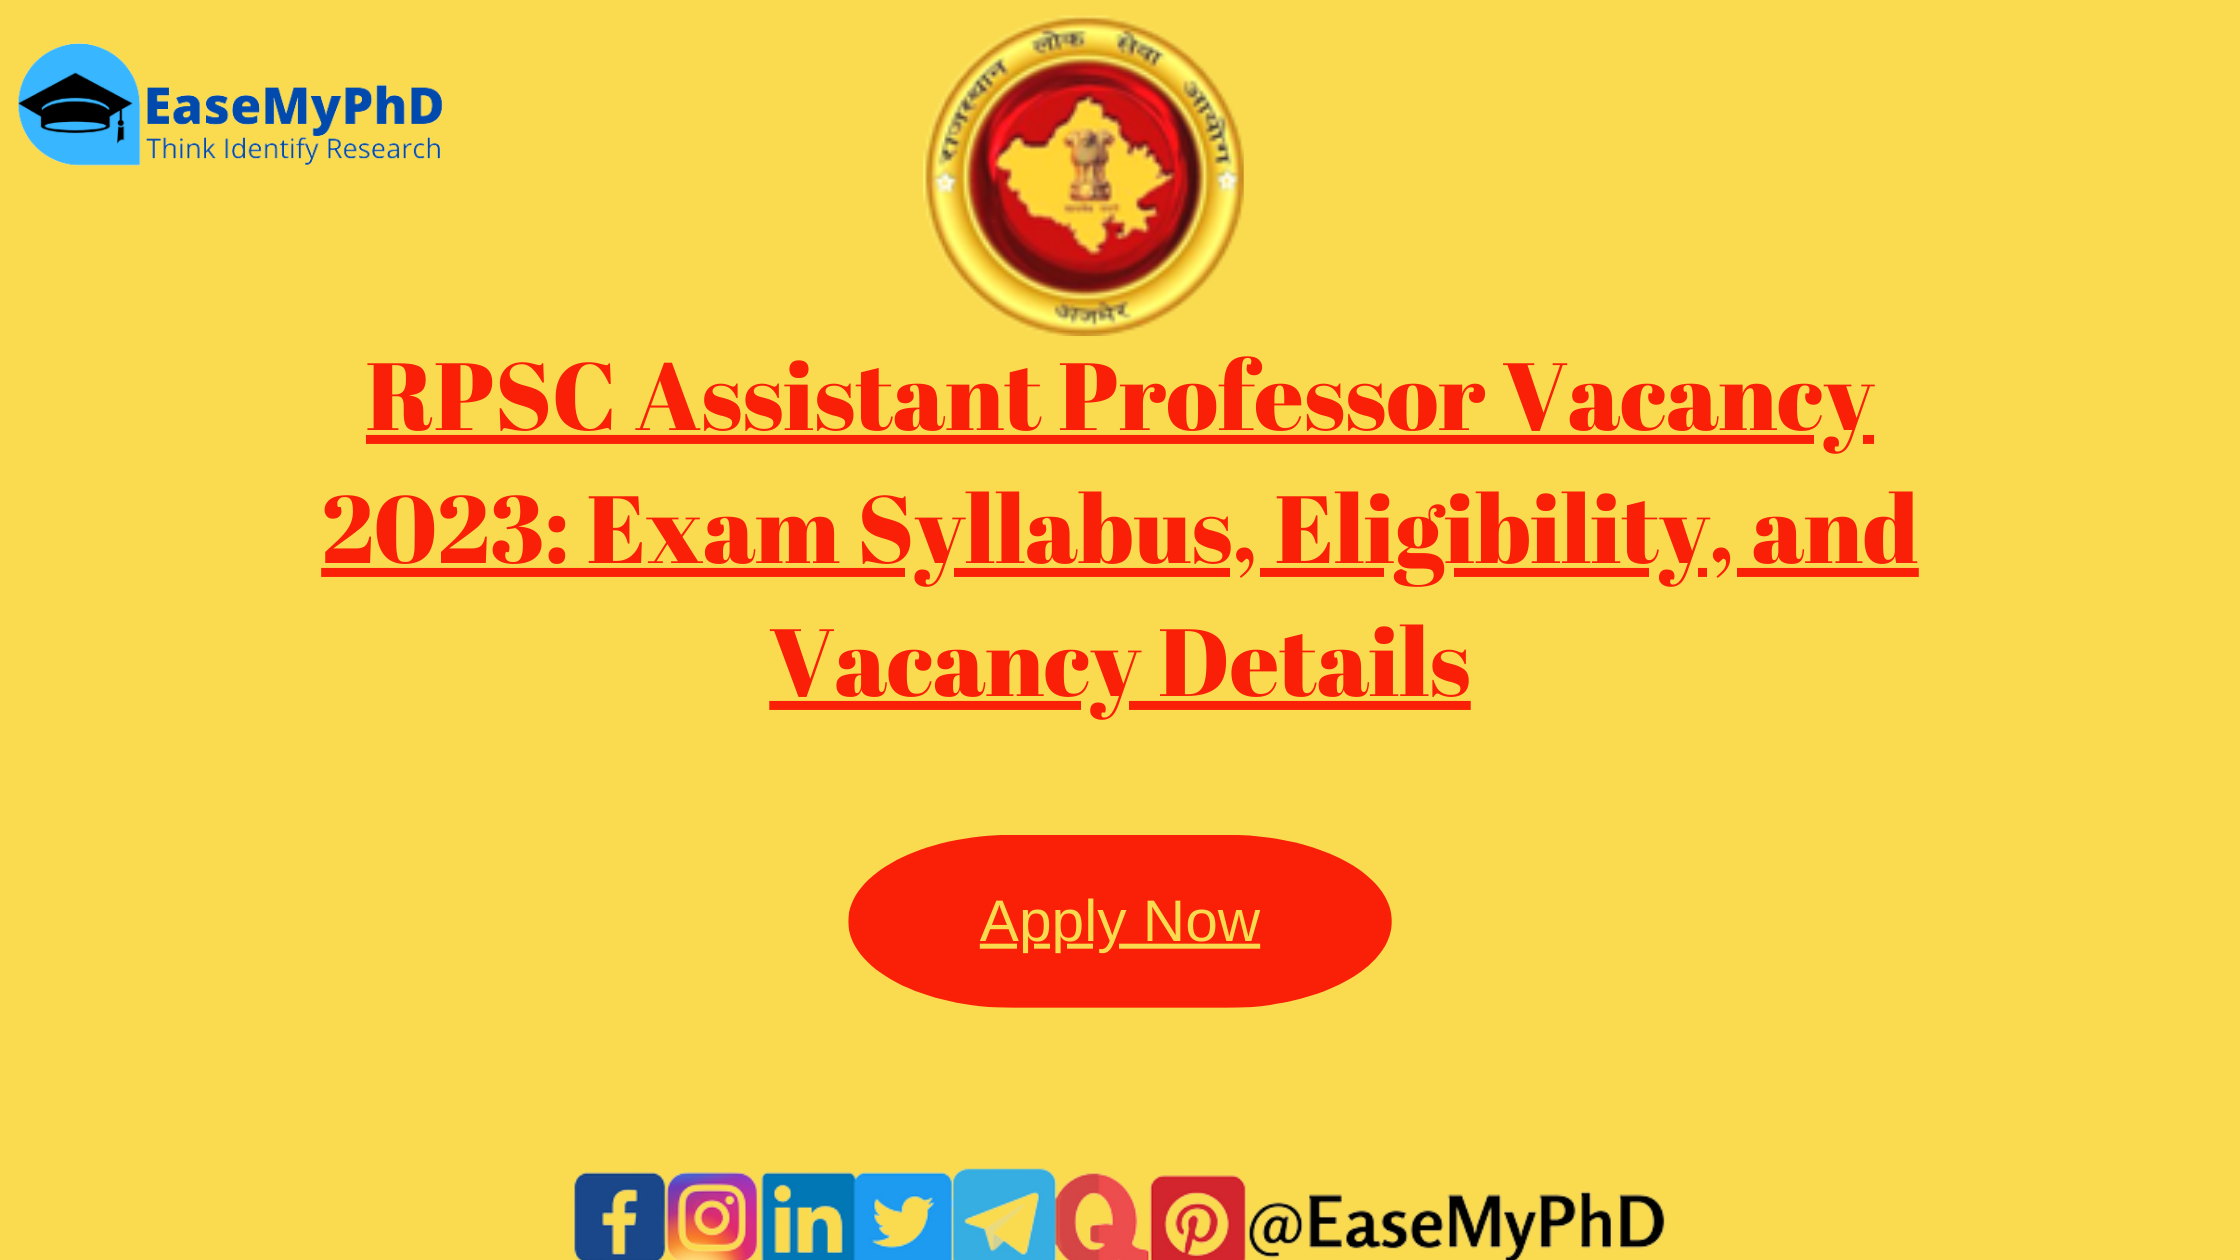 RPSC Assistant Professor Vacancy 2023: Exam Syllabus, Eligibility, and Vacancy Details